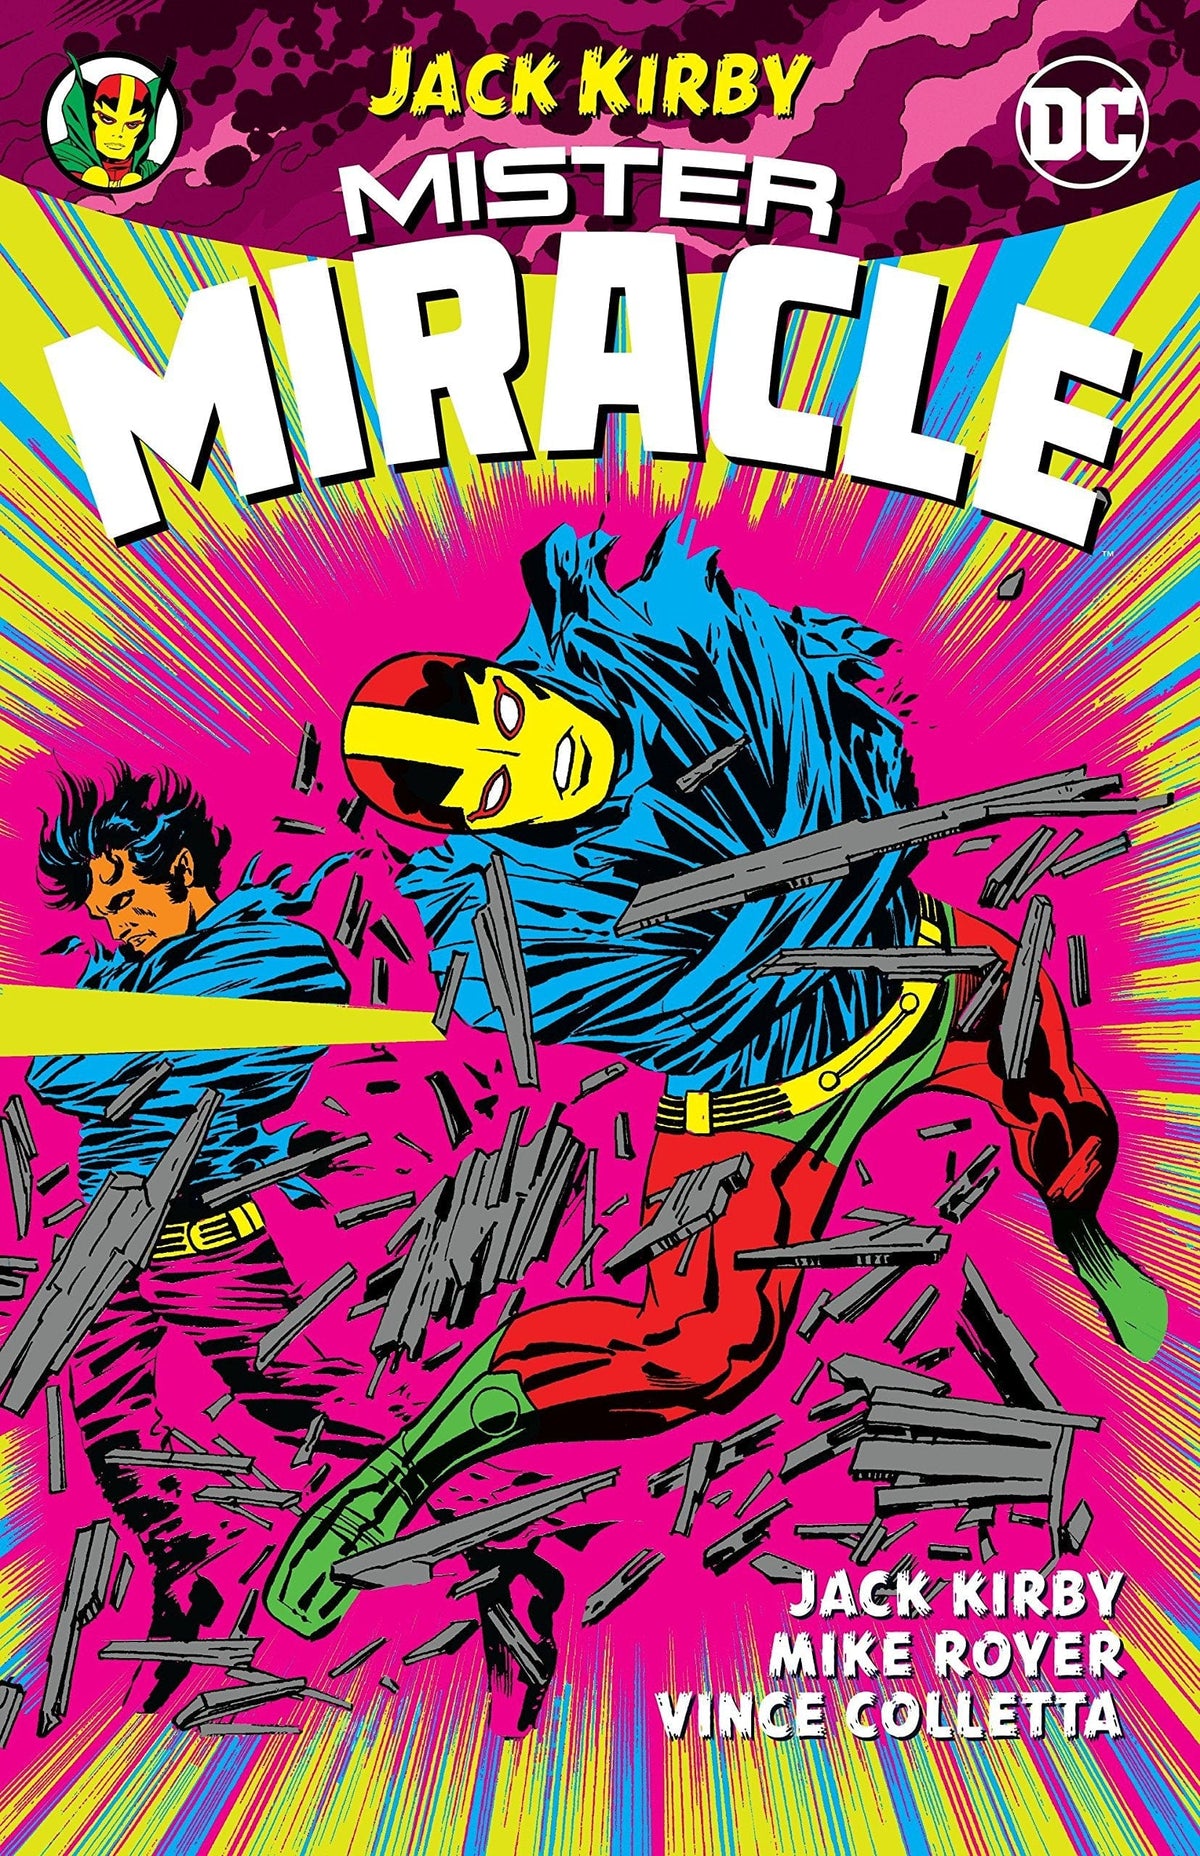 Mister Miracle by Jack Kirby (New Edition)